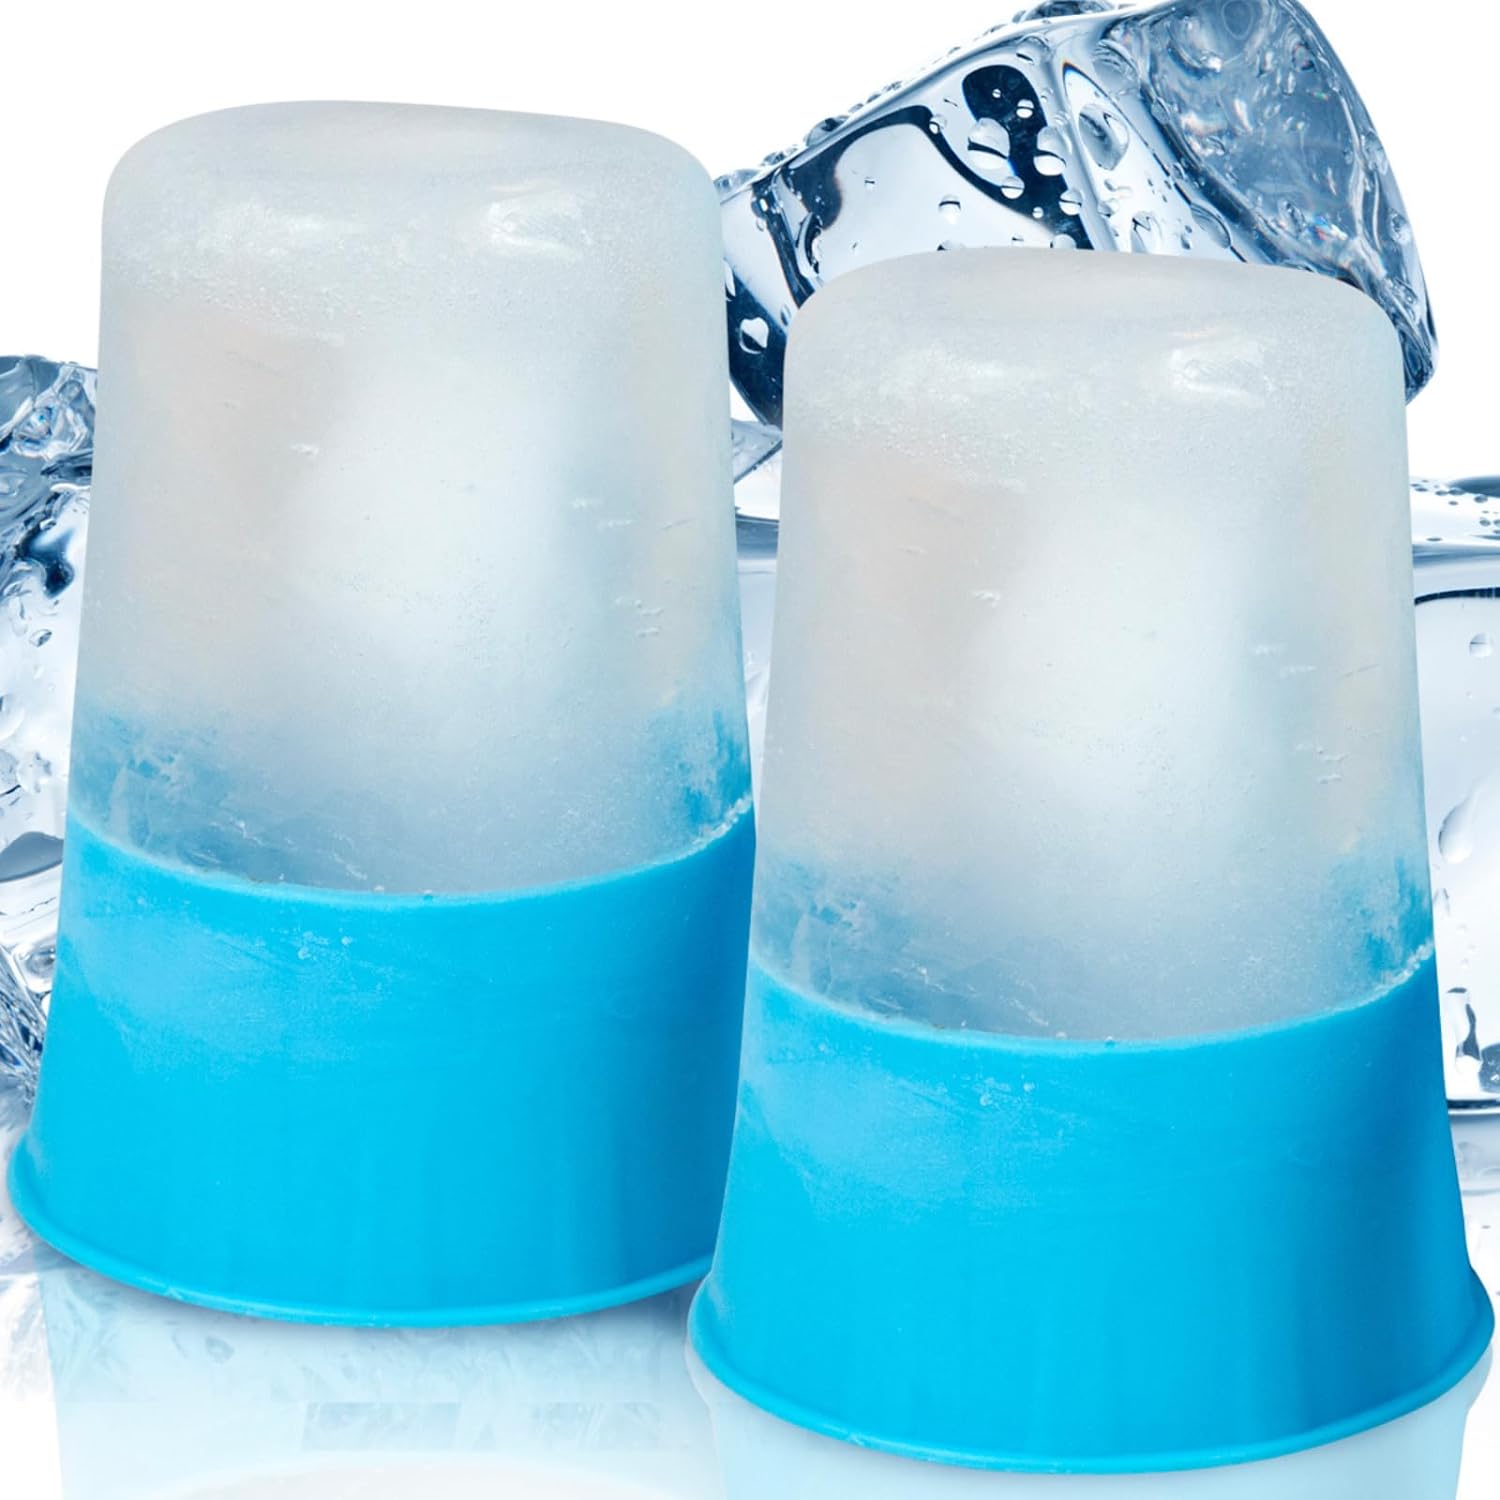 Arctic Flex Ice Massage Therapy Cups (2 Pack) - Cold Roller Tool for I